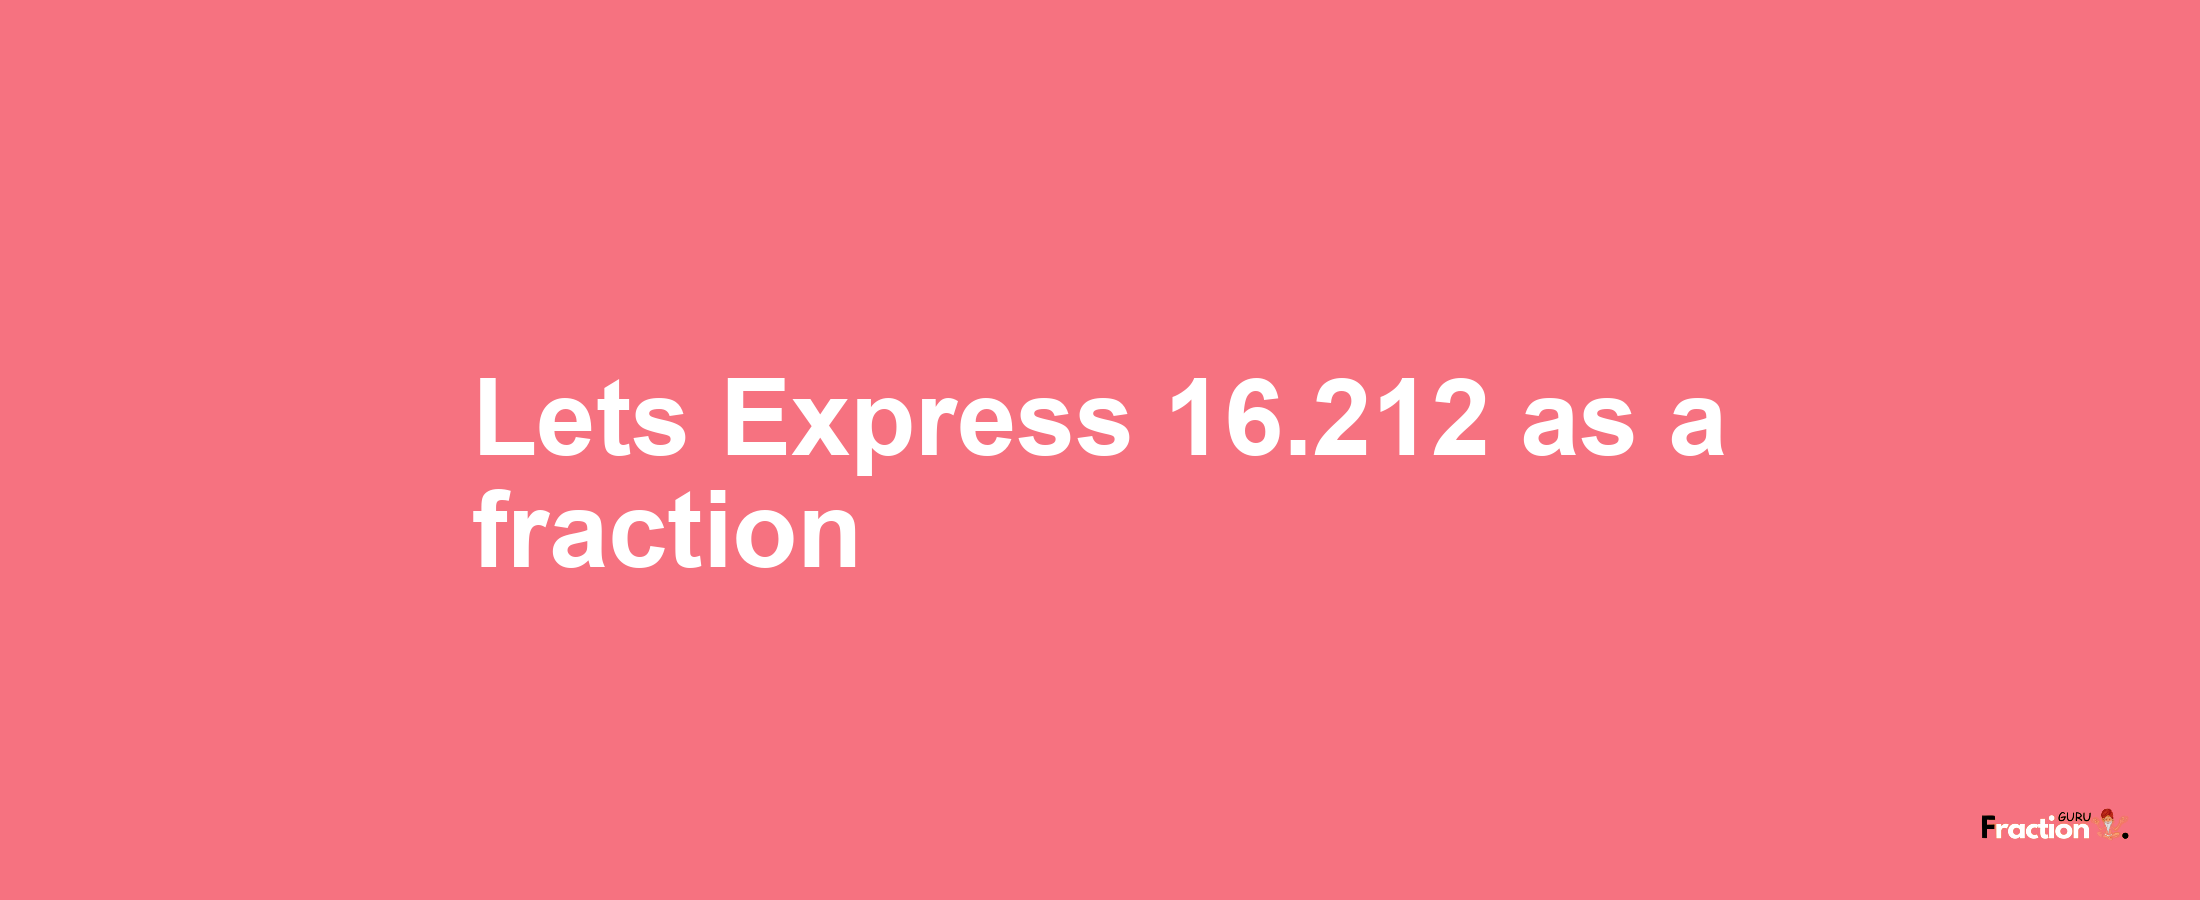 Lets Express 16.212 as afraction